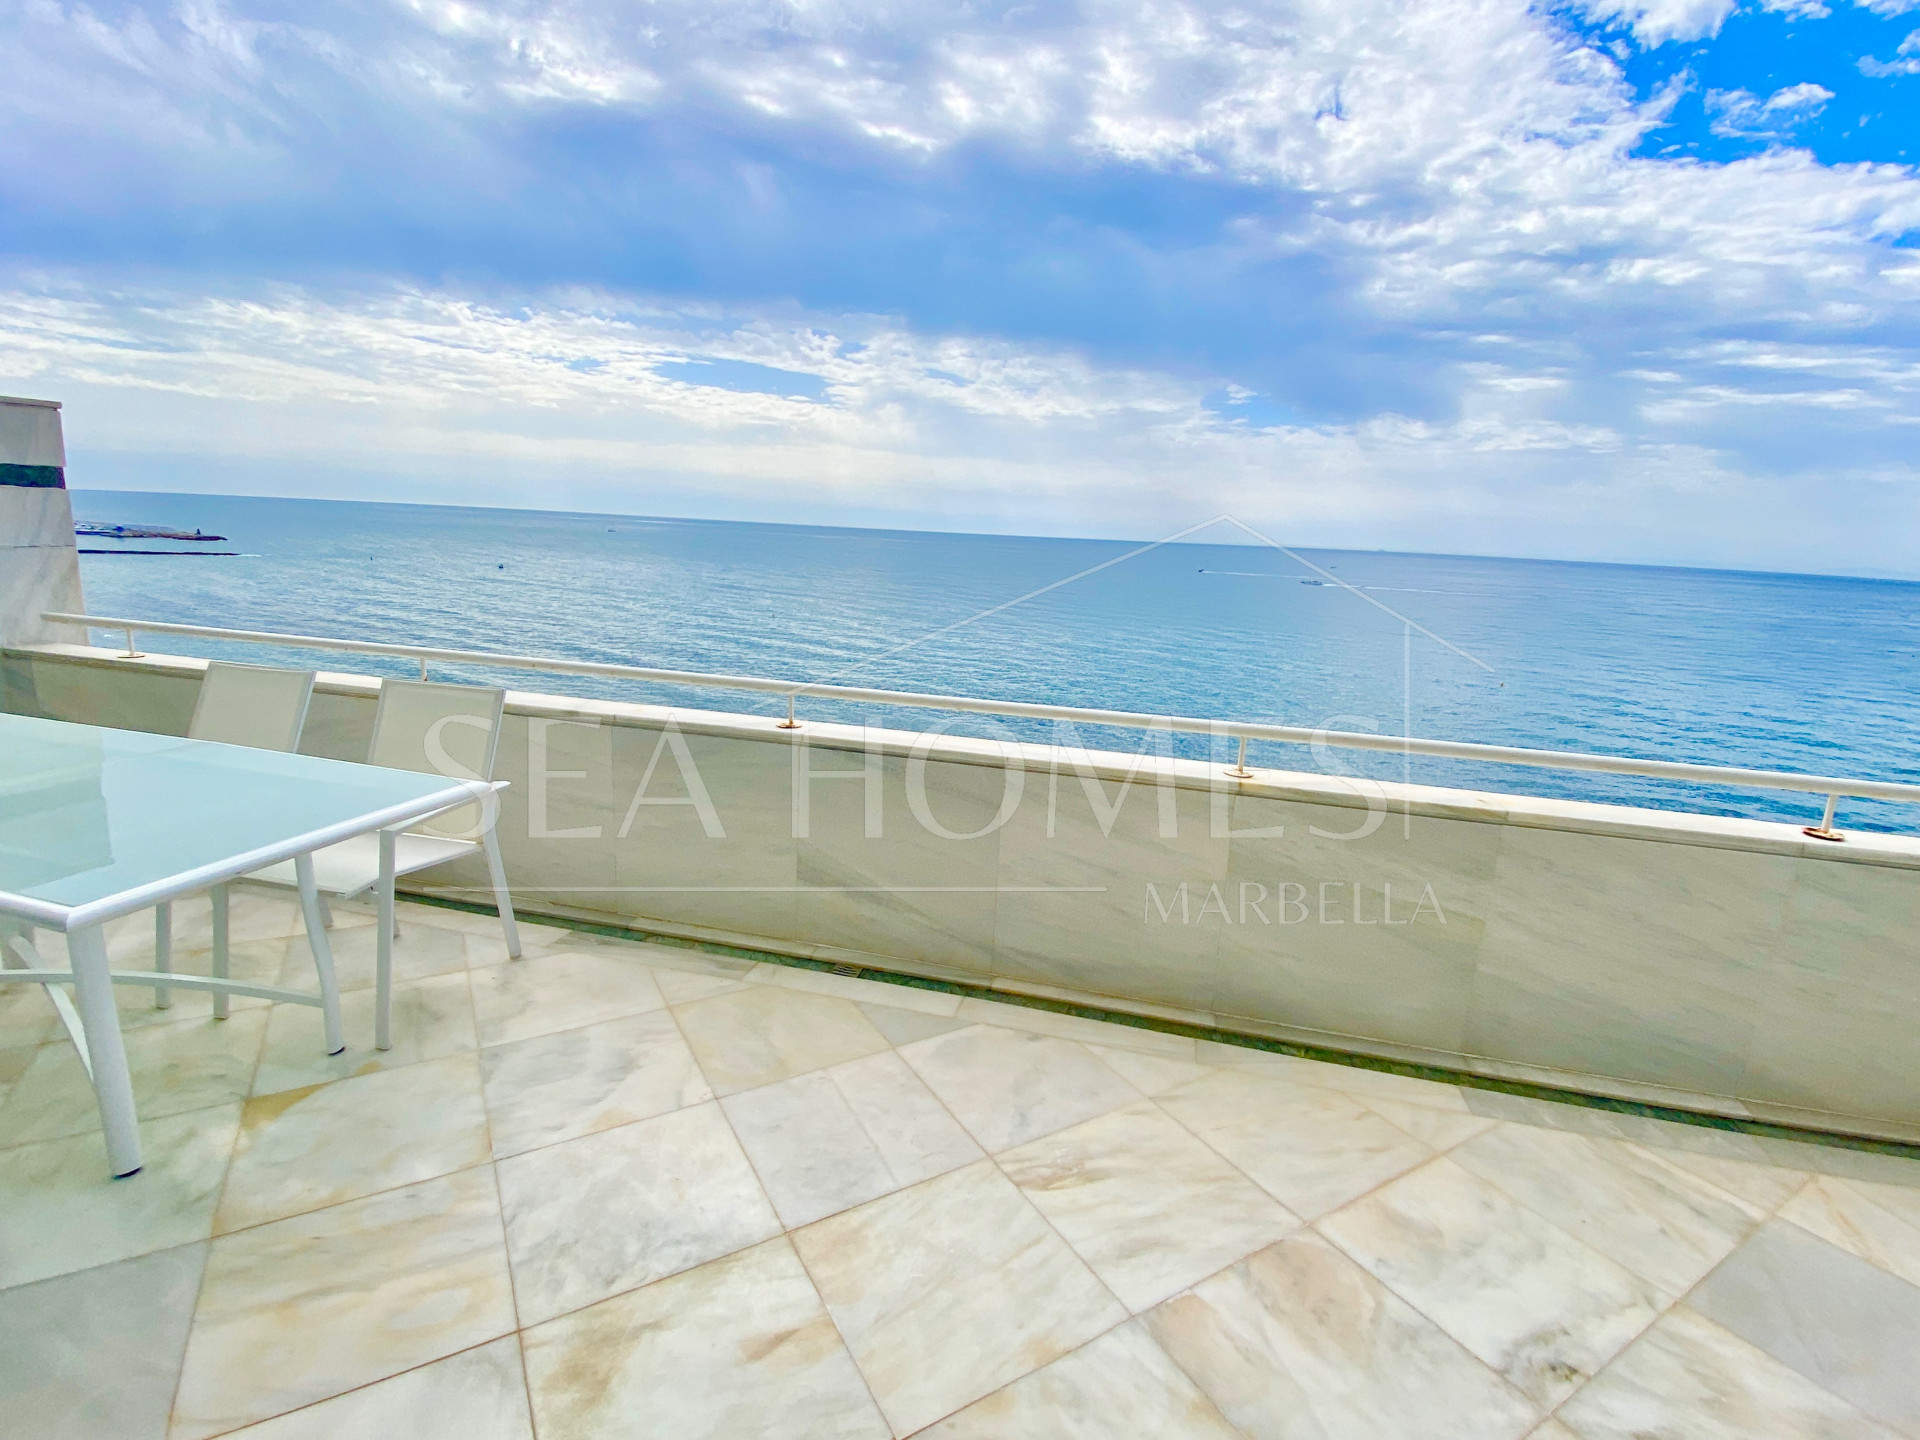 Exclusive apartment for rent at Mare Nostrum with unbeatable sea views